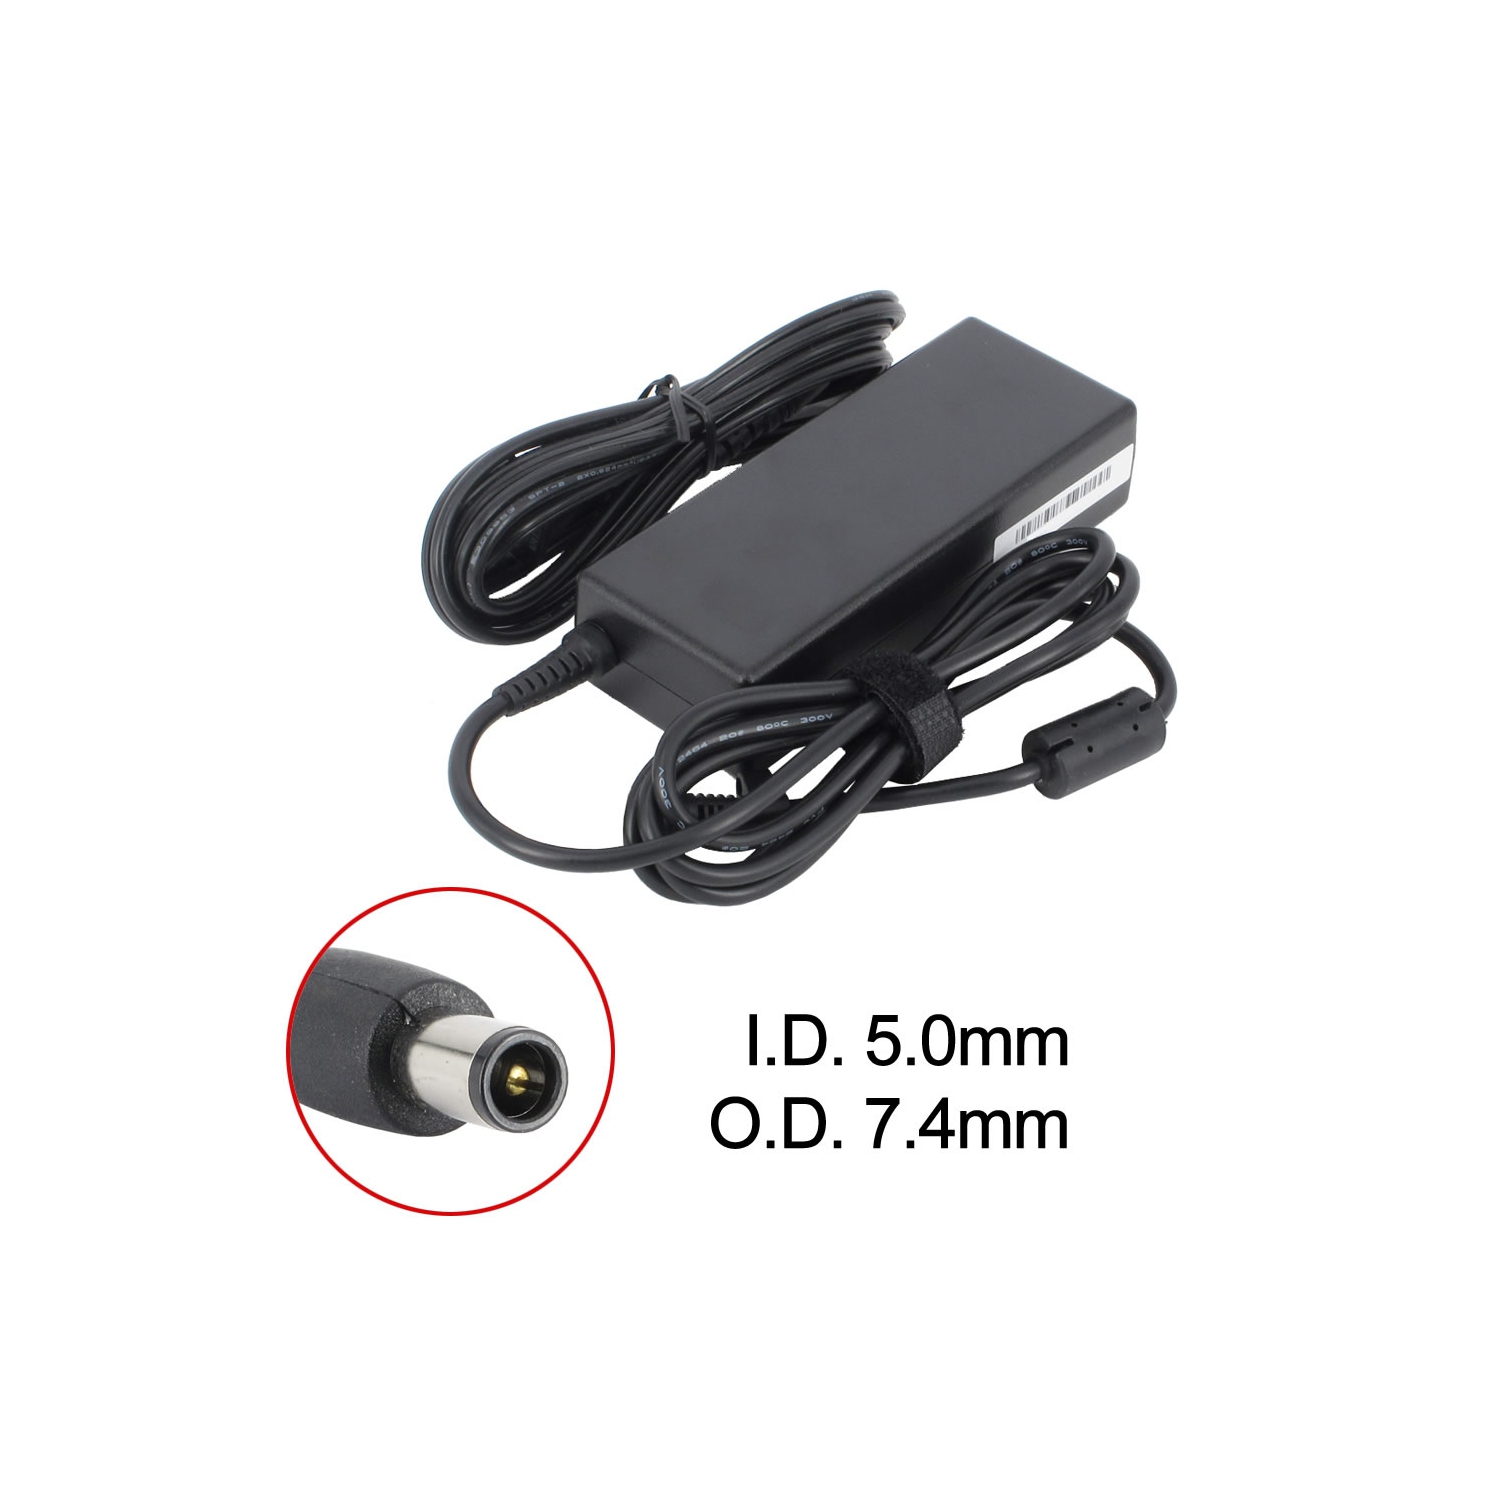 New Laptop AC Adapter for Dell Inspiron 14R M5010, 09T215, 310-7251, 310-9376, 331-5968, CF823, FA90PM135, N6M8J, TJ76K